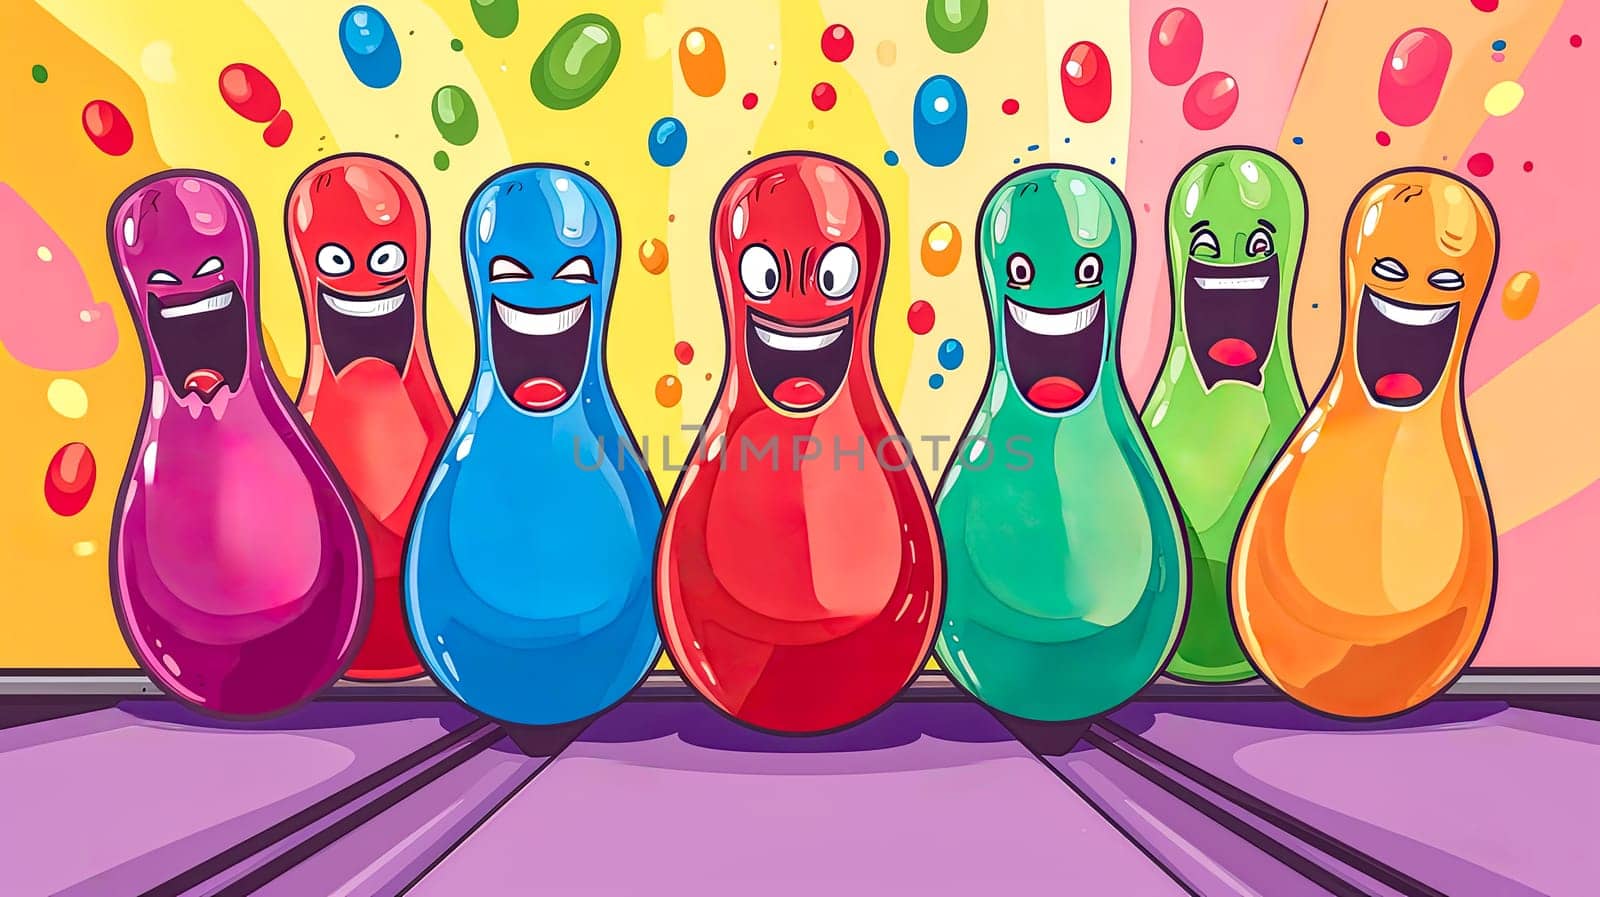 Cheerful cartoon bowling pins in bright colors. by Edophoto